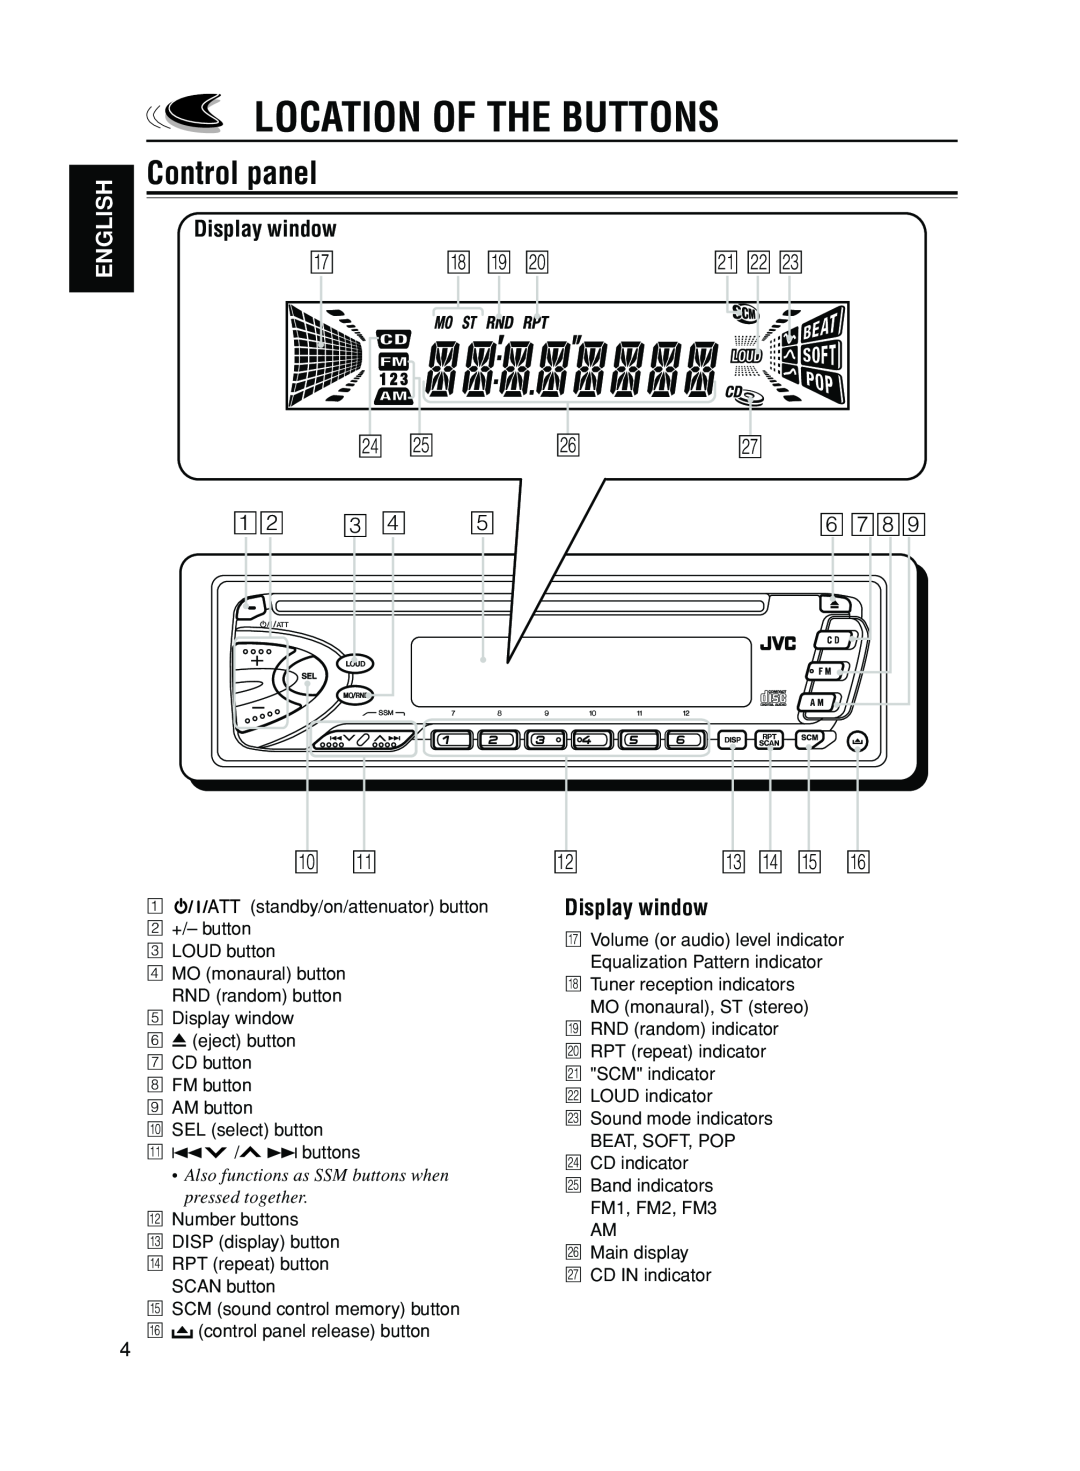 JVC KD-S50 manual Location Of The Buttons, Control panel, uDisplay window, erty, ajsd, 6789, English 